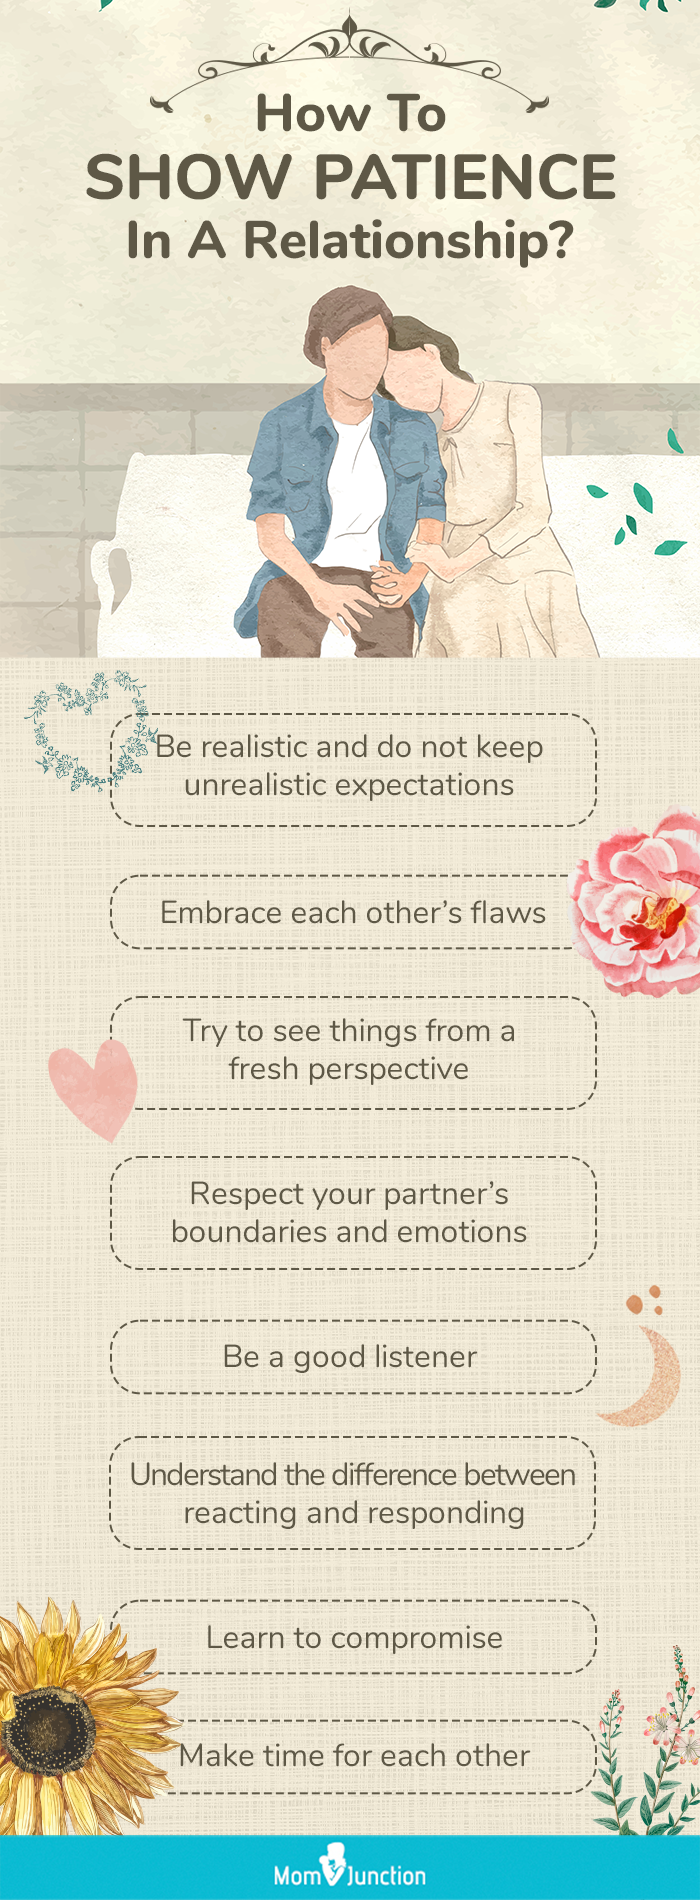 how to show patience in a relationship [infographic]